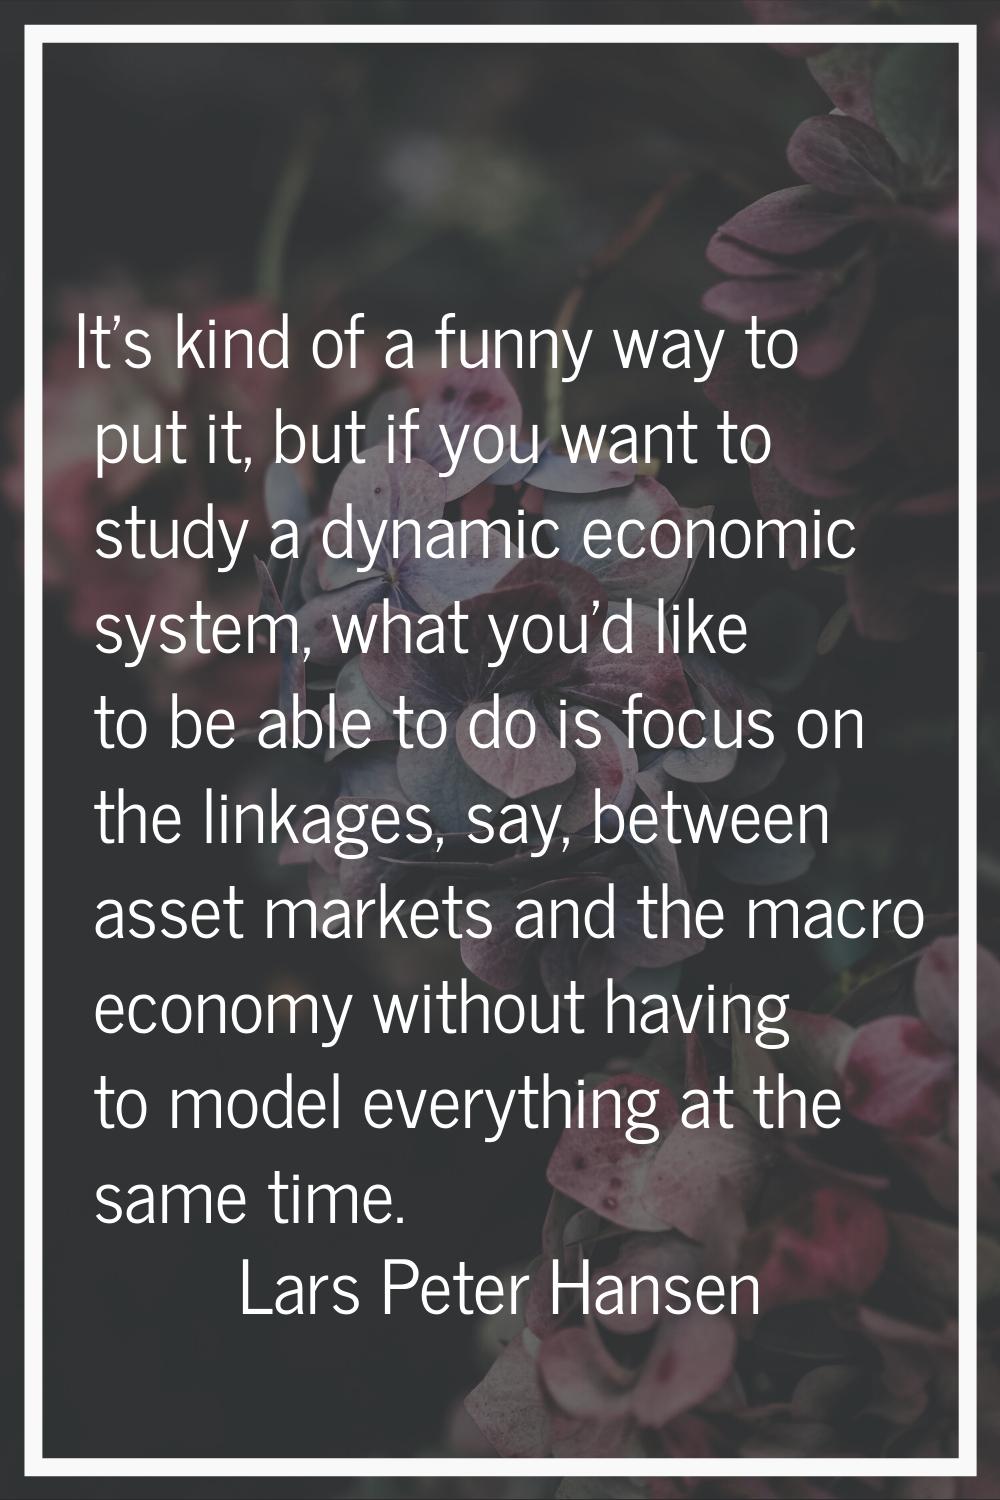 It's kind of a funny way to put it, but if you want to study a dynamic economic system, what you'd 